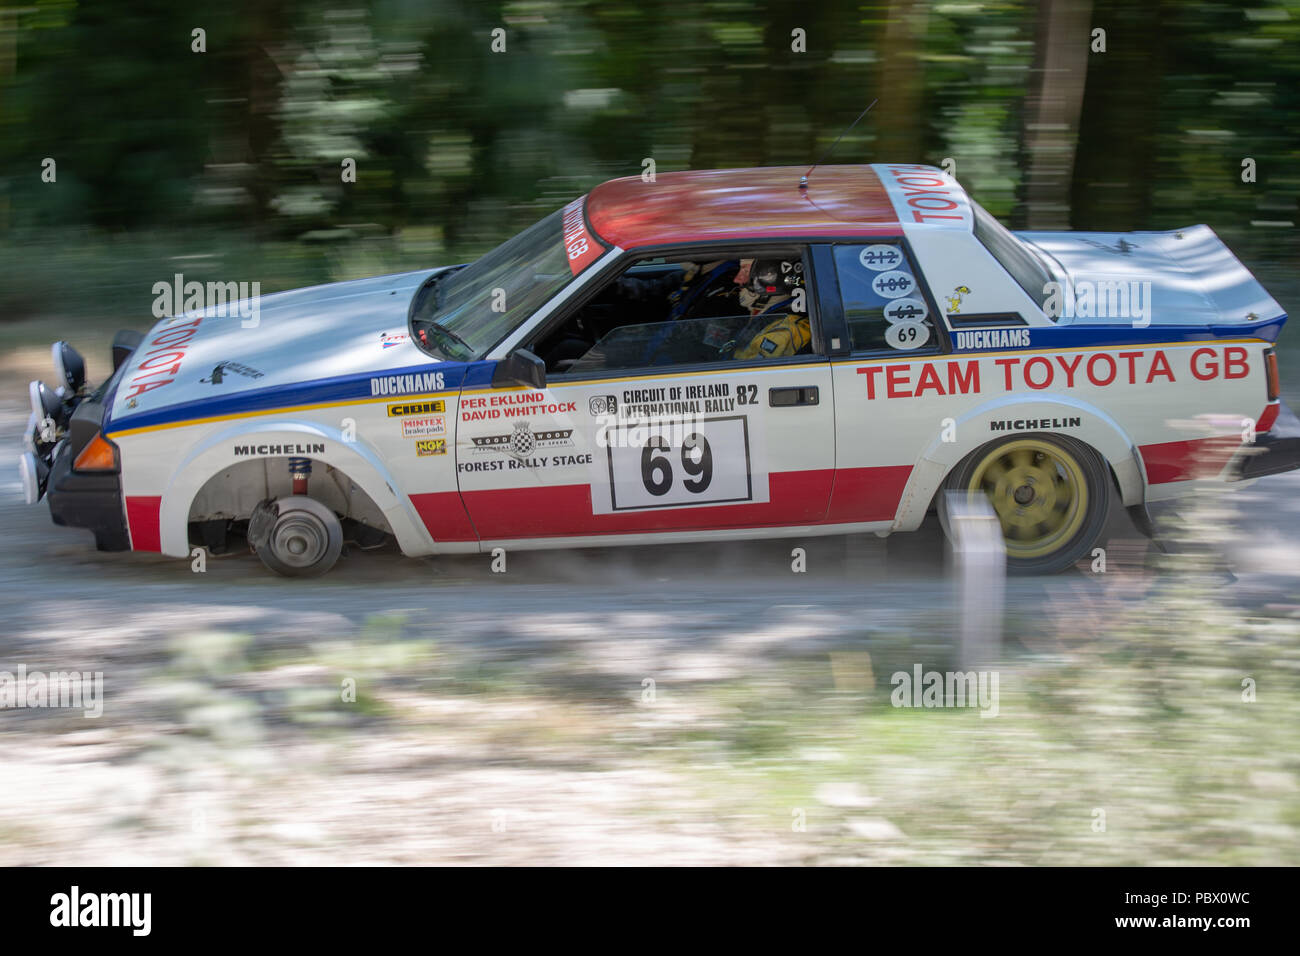 Toyota Celica RA63 Rally Car Running on Three Wheels in the Forest Stages at Goodwood Festival of Speed 2018 Stock Photo